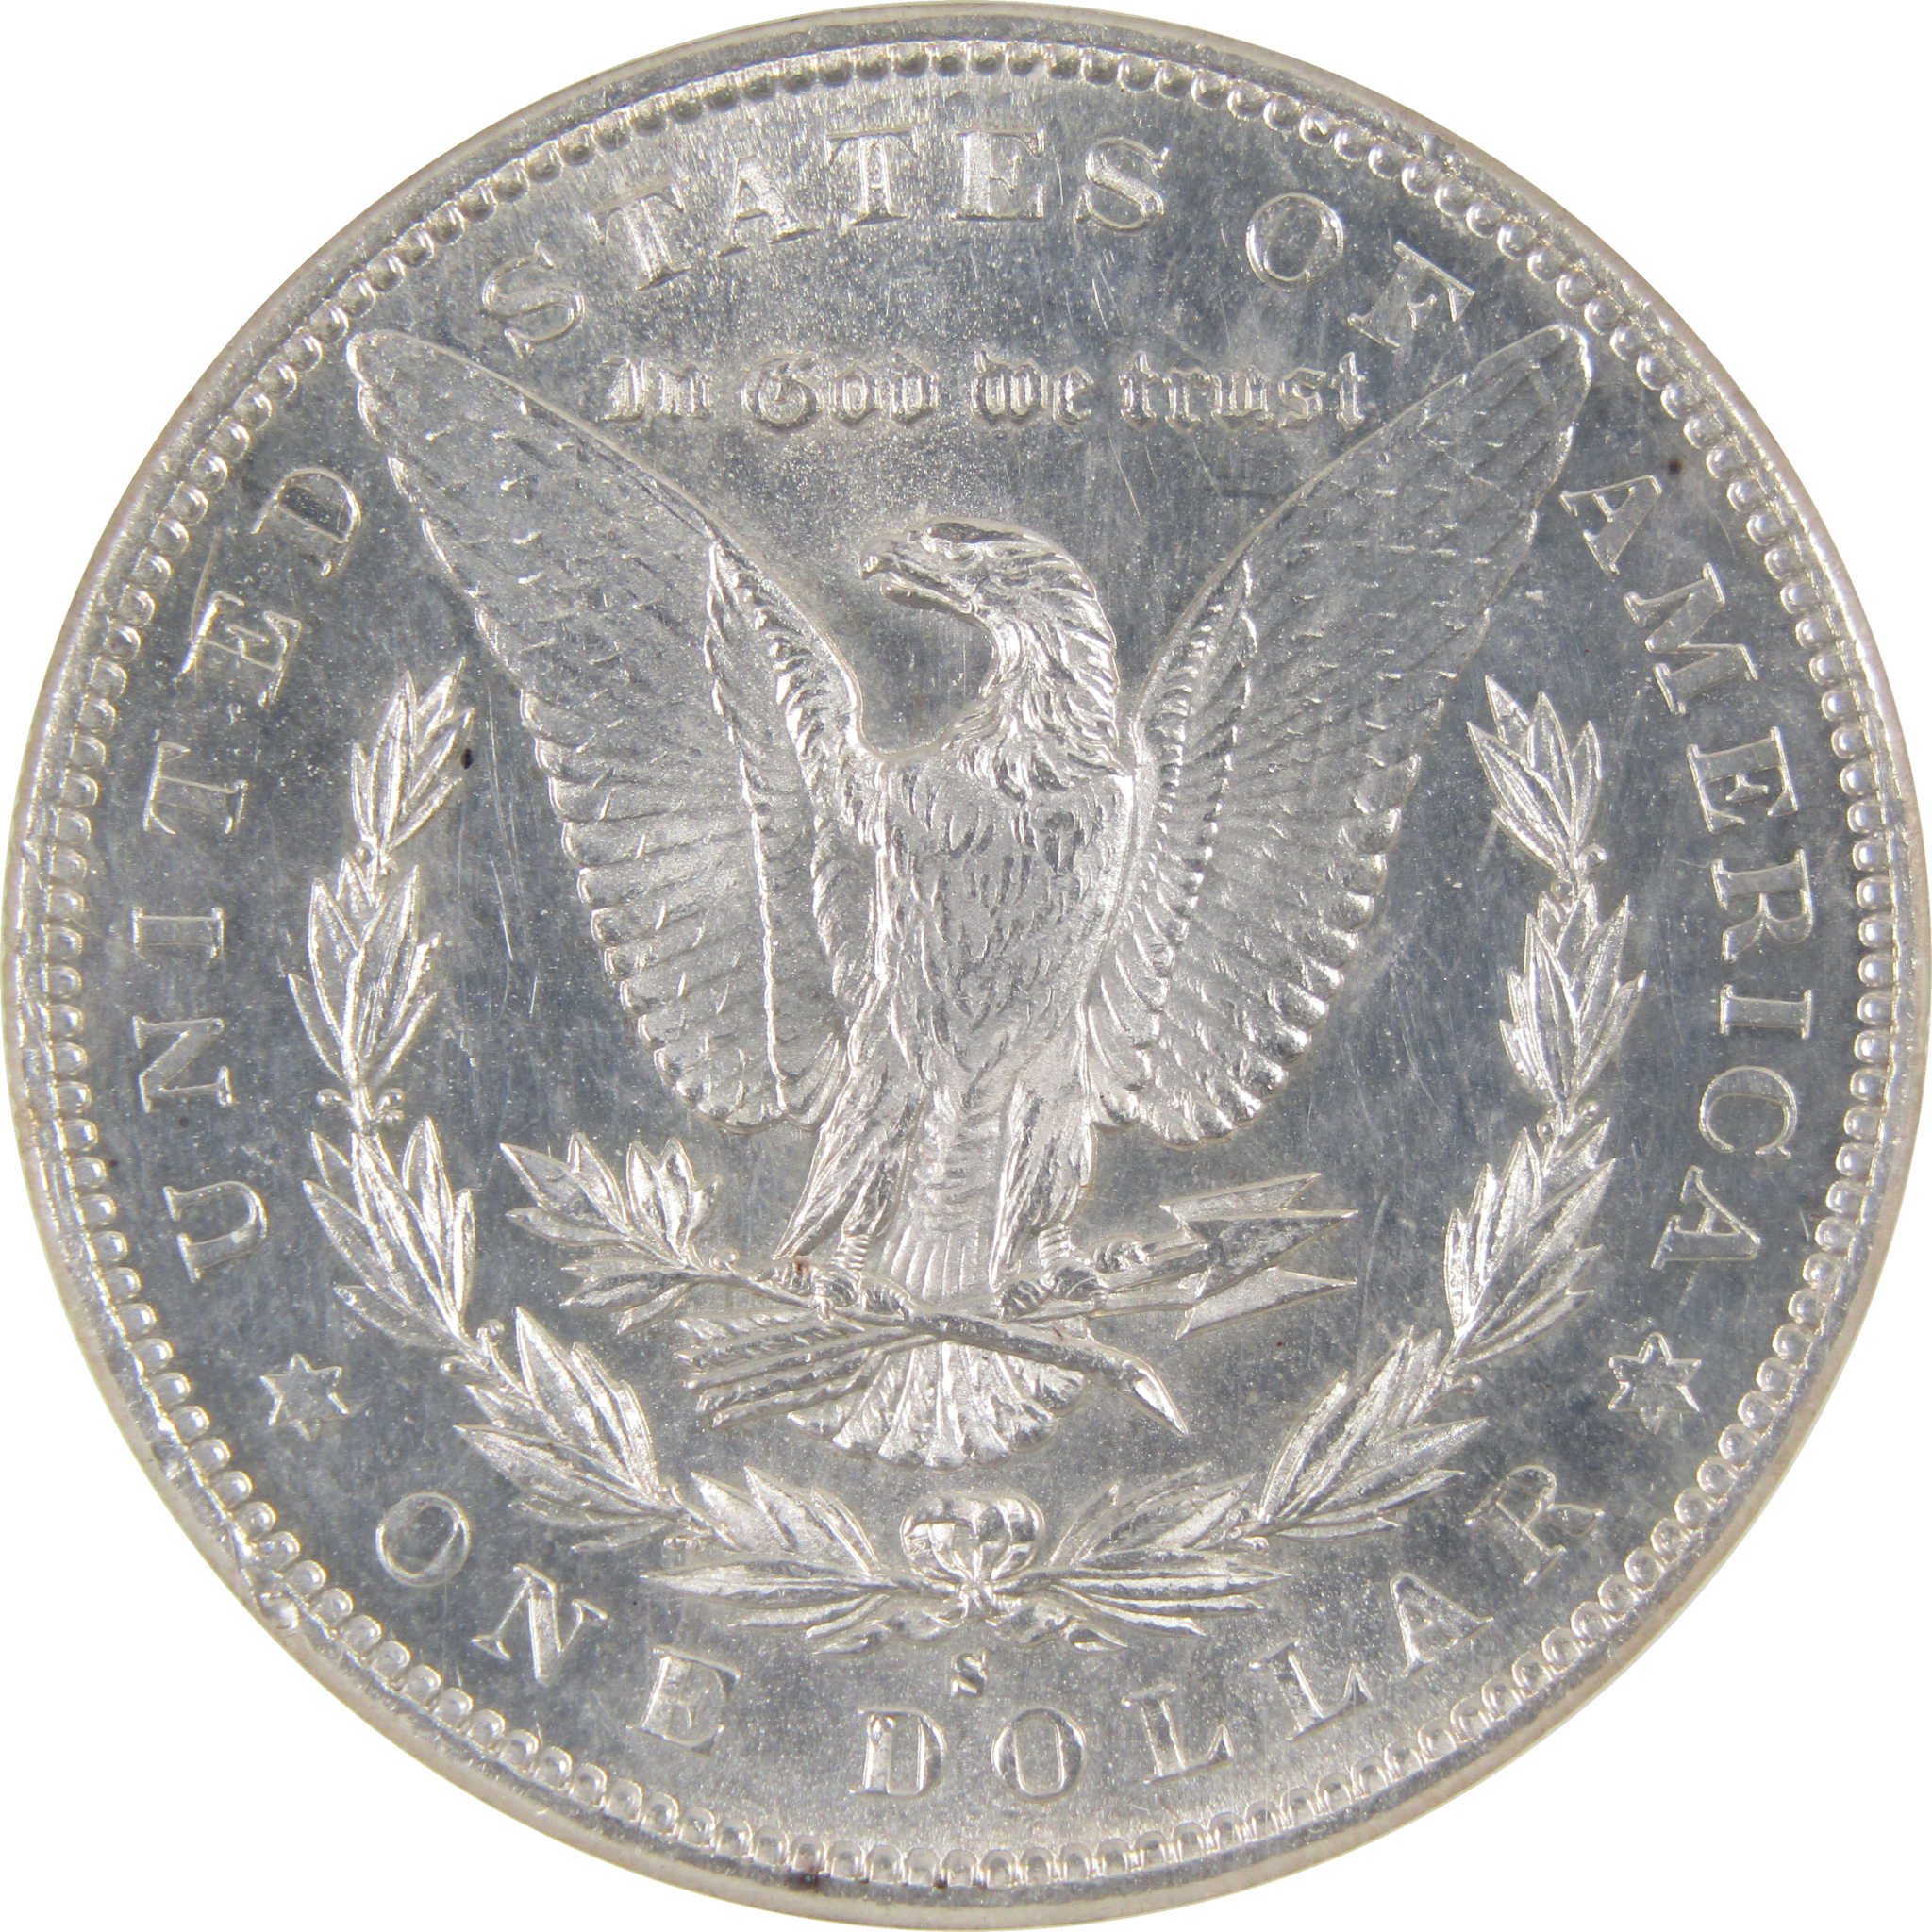 1897 S Morgan Dollar MS 64 NGC 90% Silver Uncirculated SKU:I2914 - Morgan coin - Morgan silver dollar - Morgan silver dollar for sale - Profile Coins &amp; Collectibles